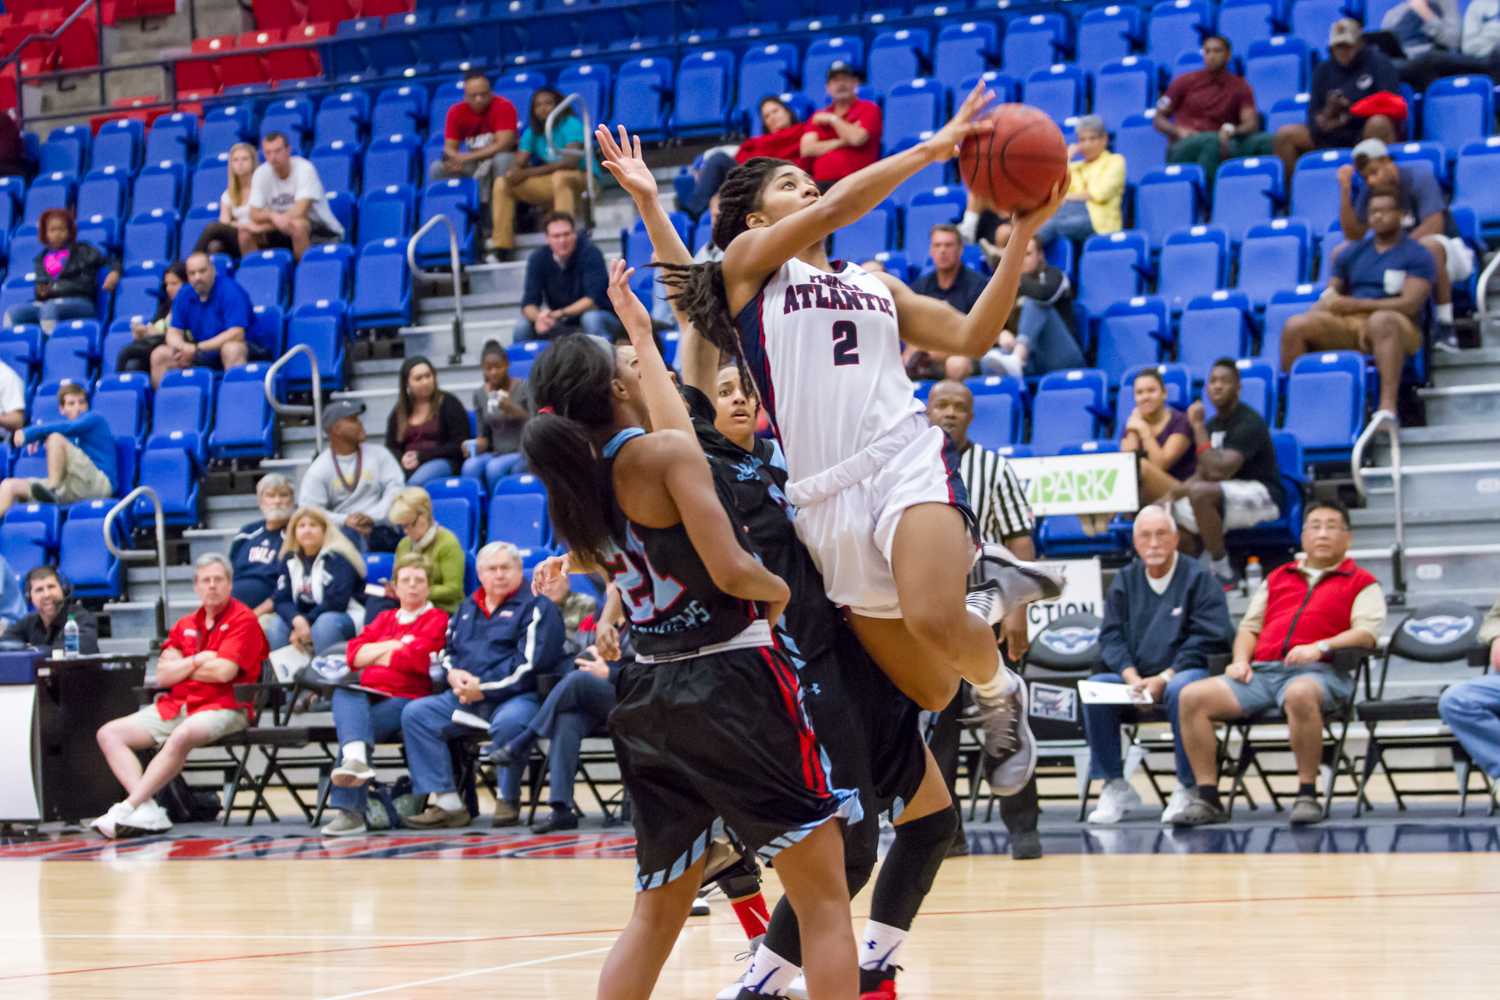 Shaneese Bailey (2) rises to take a shot in traffic. The sophomore out of Callahan, Fla. scored 24 points in the loss against La. Tech. 